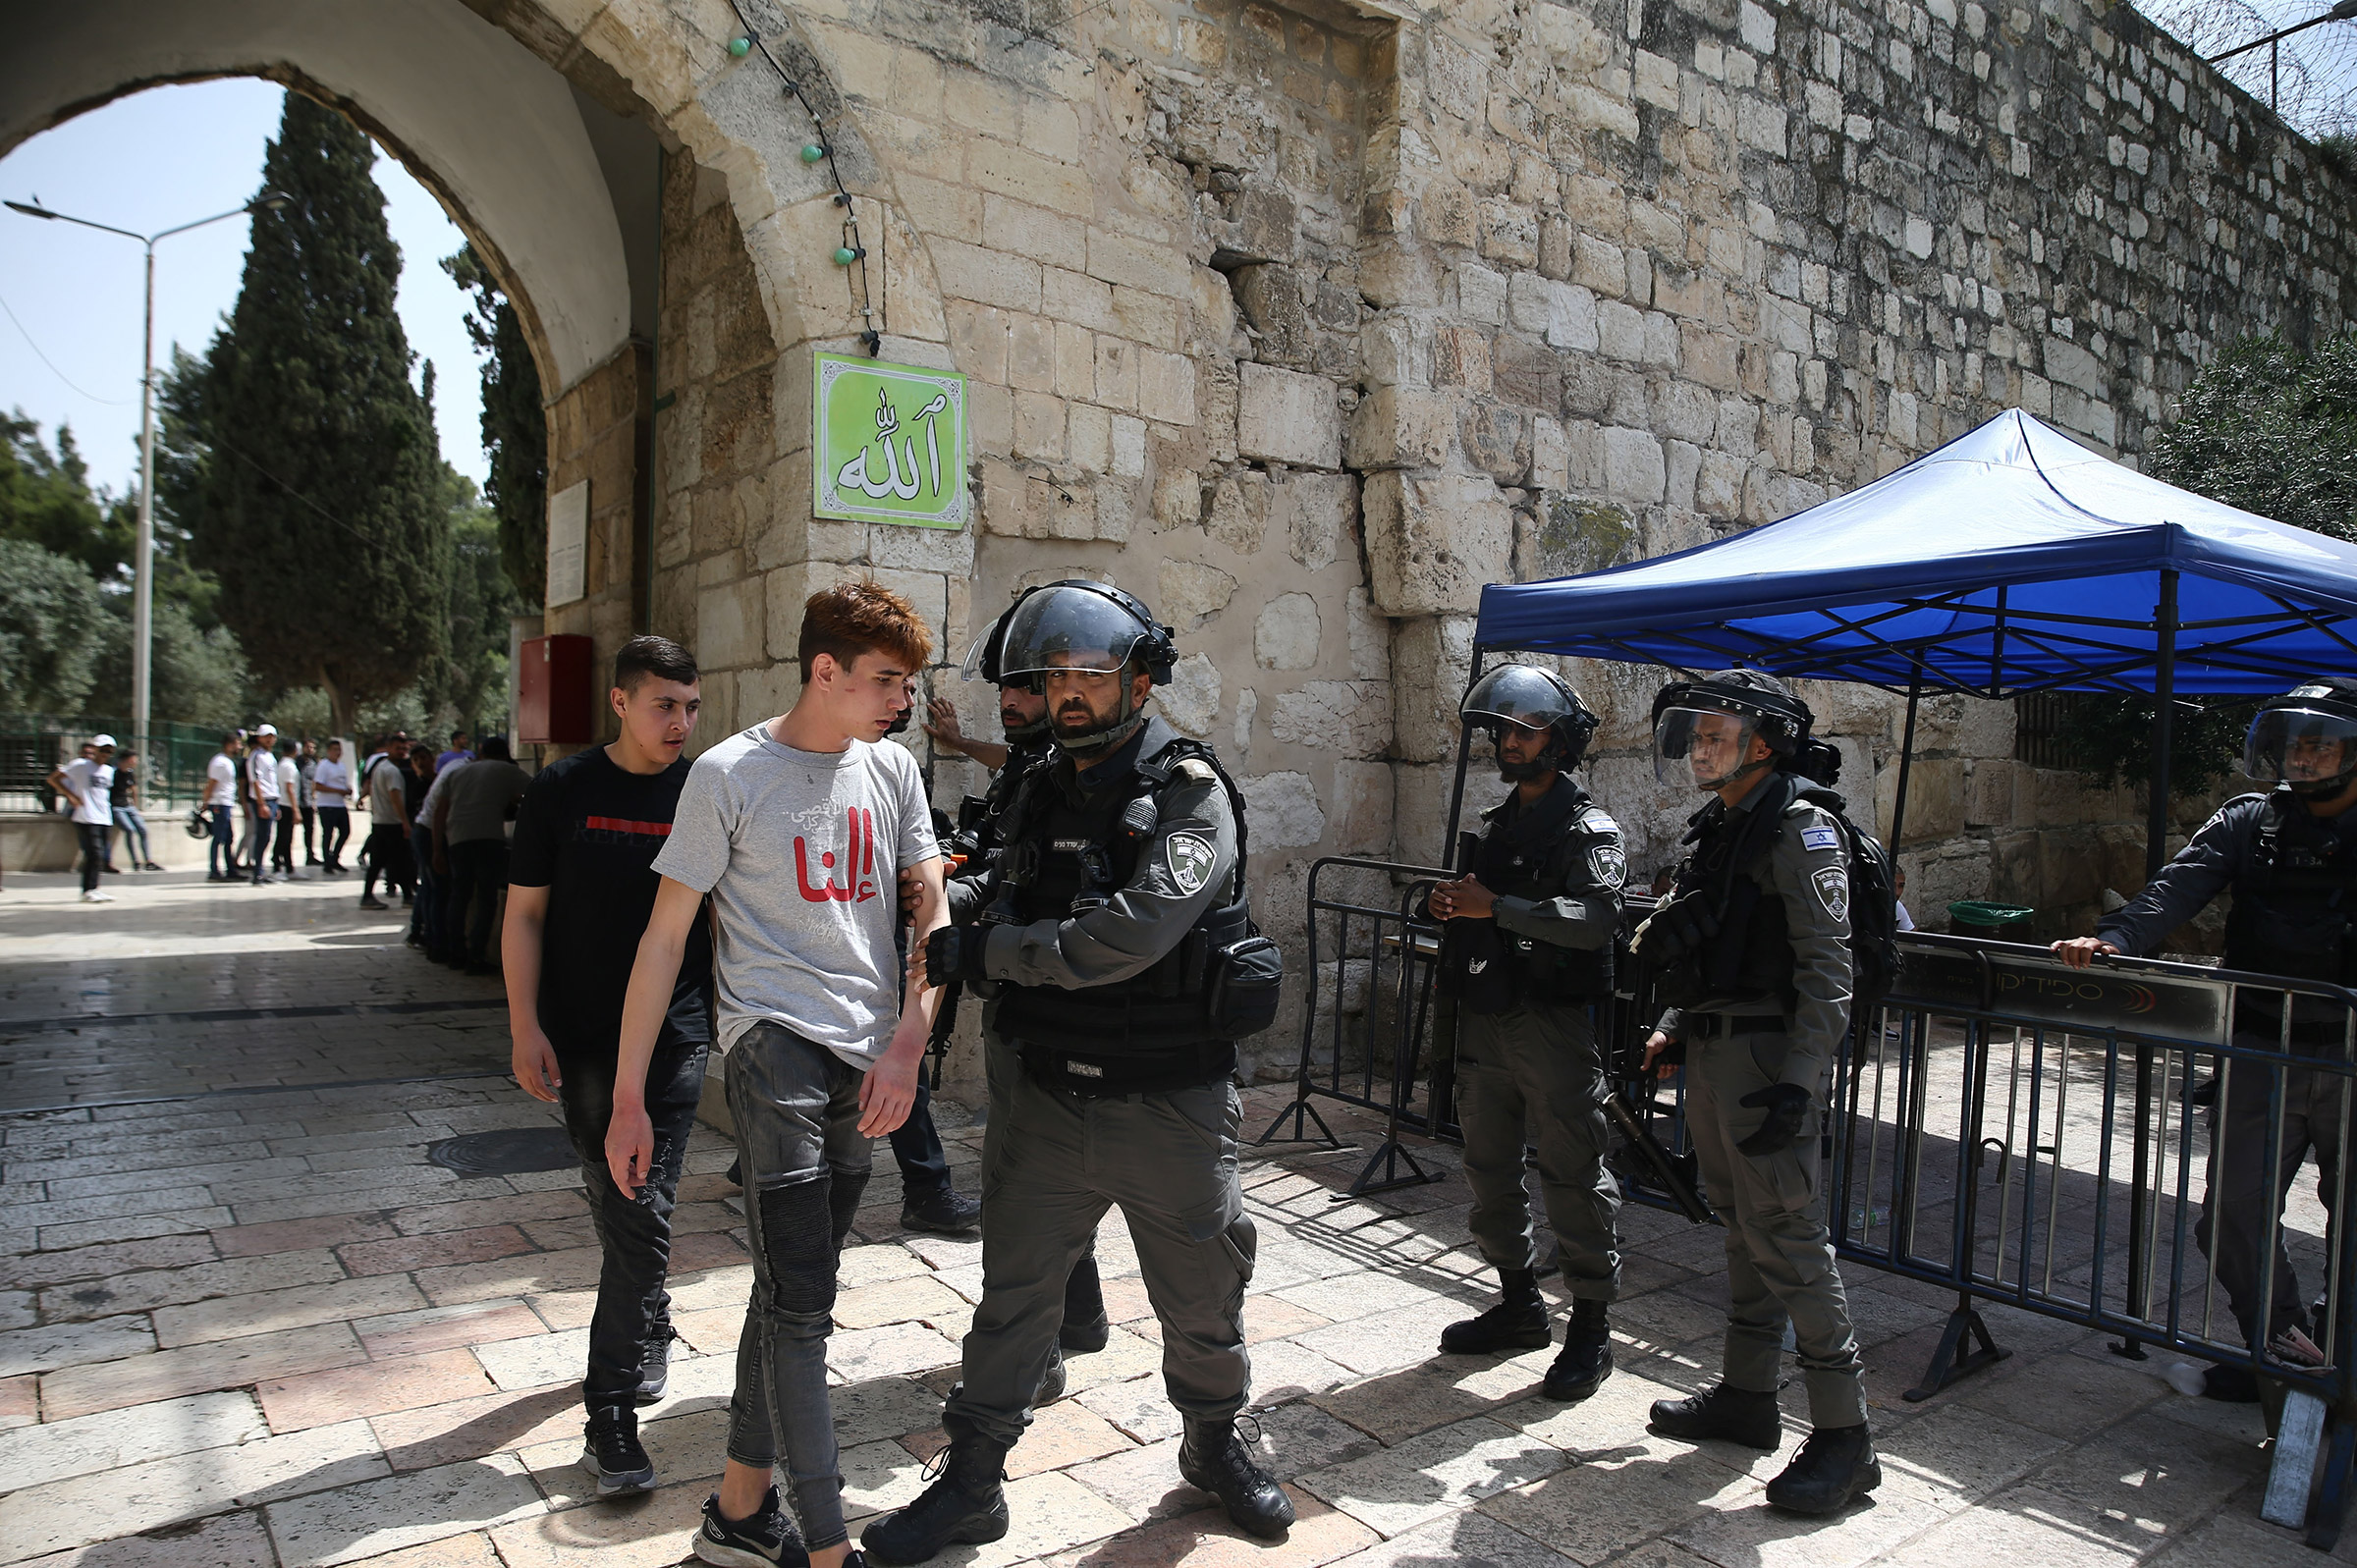 Israeli police detain some Palestinians during their intervention at the Al-Aqsa Mosque in East Jerusalem on May 21, 2021.